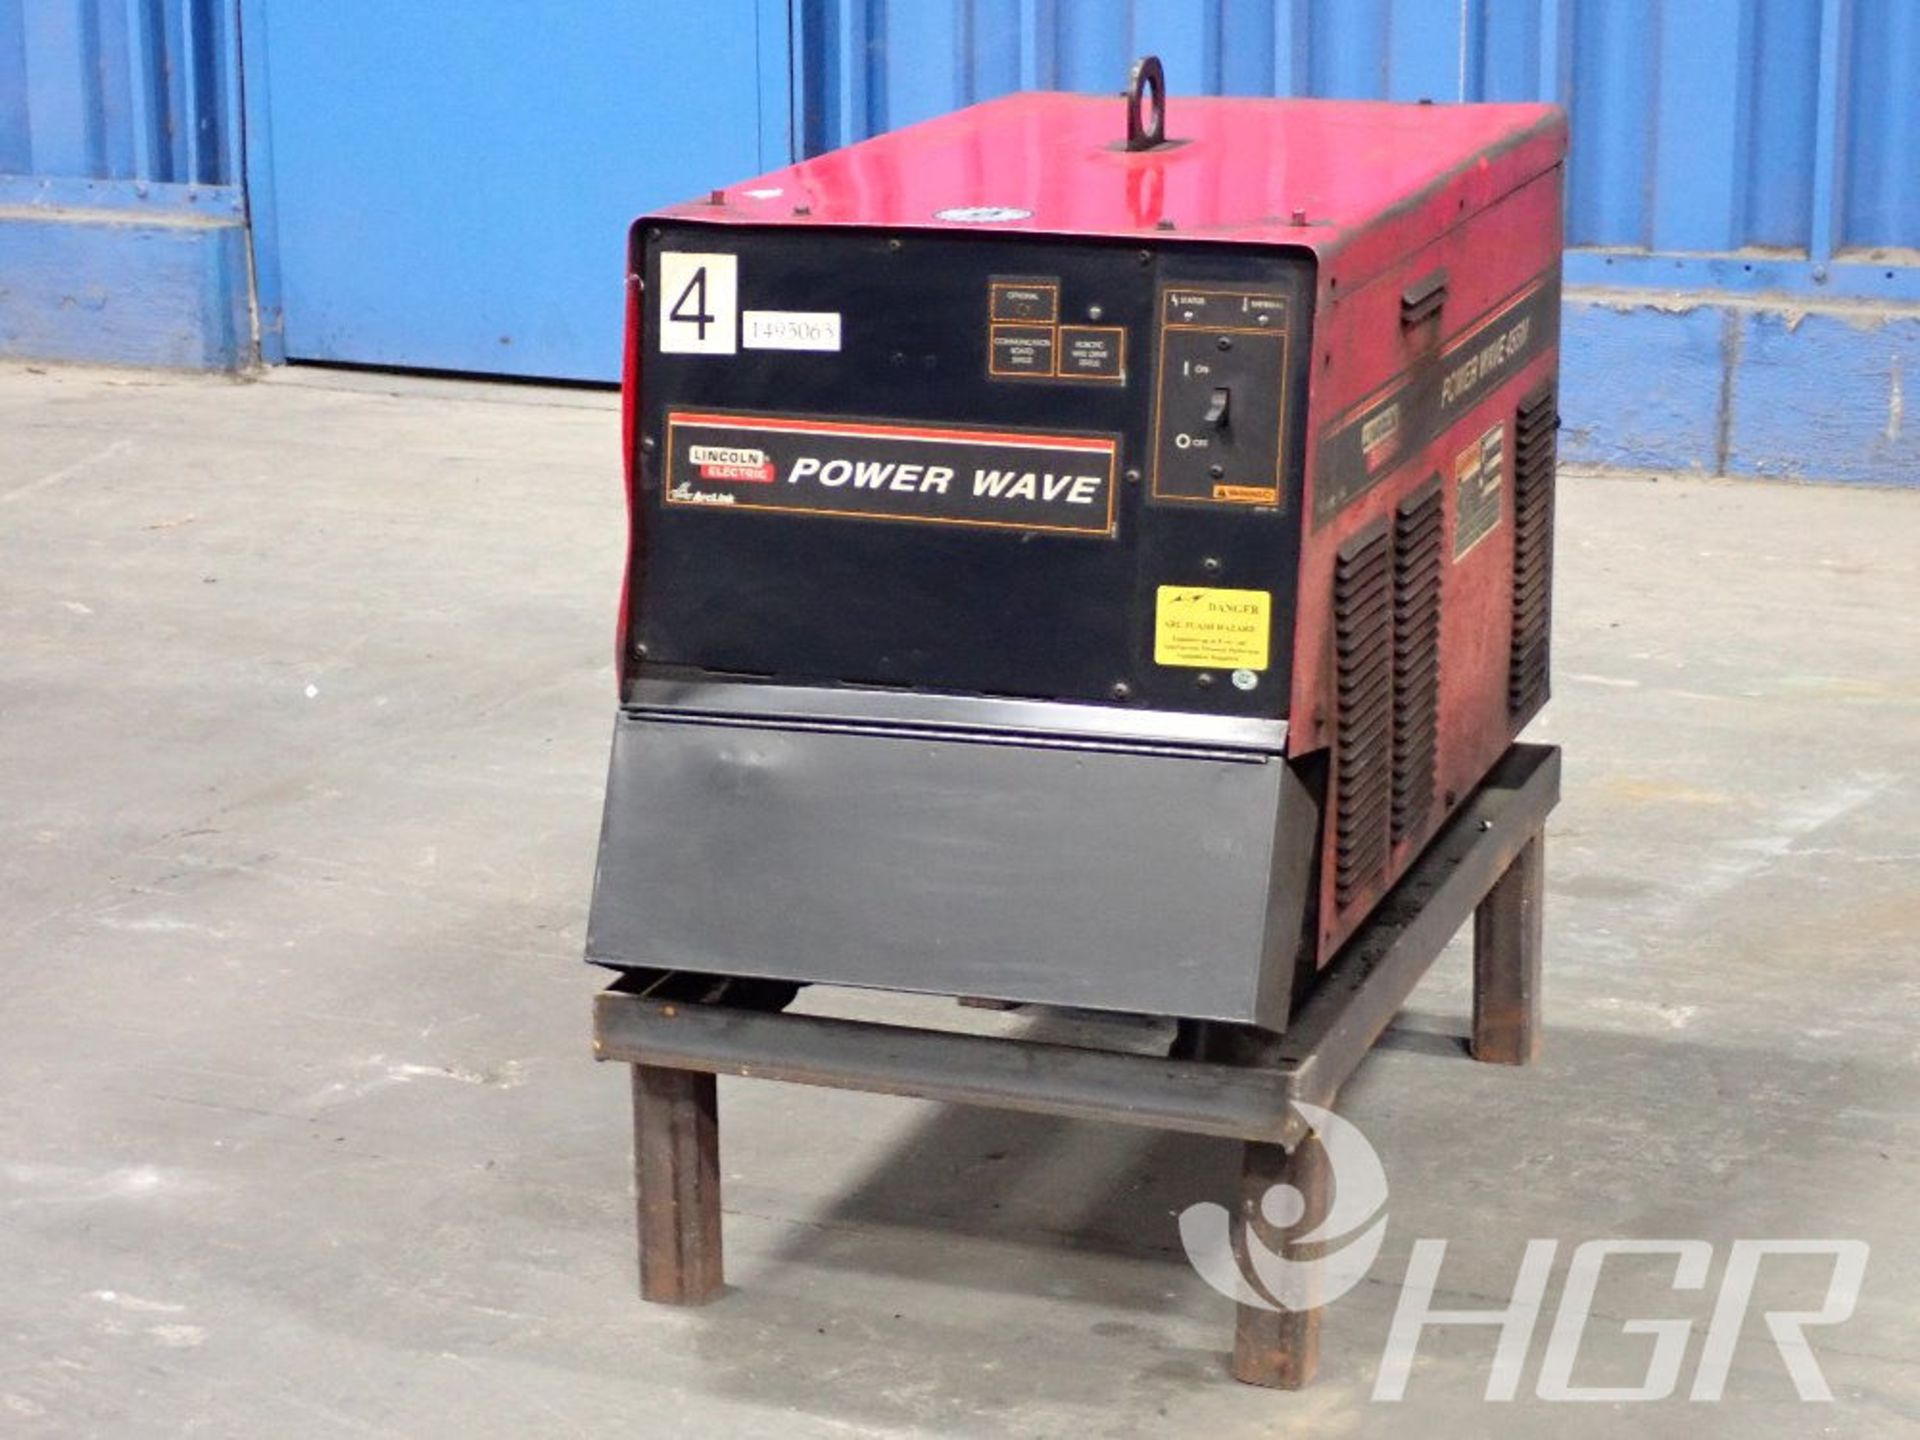 LINCOLN ELECTRIC WELDER, Model POWER WAVE 455M, Date: n/a; s/n SPLC42304401050804385, Approx. - Image 2 of 8